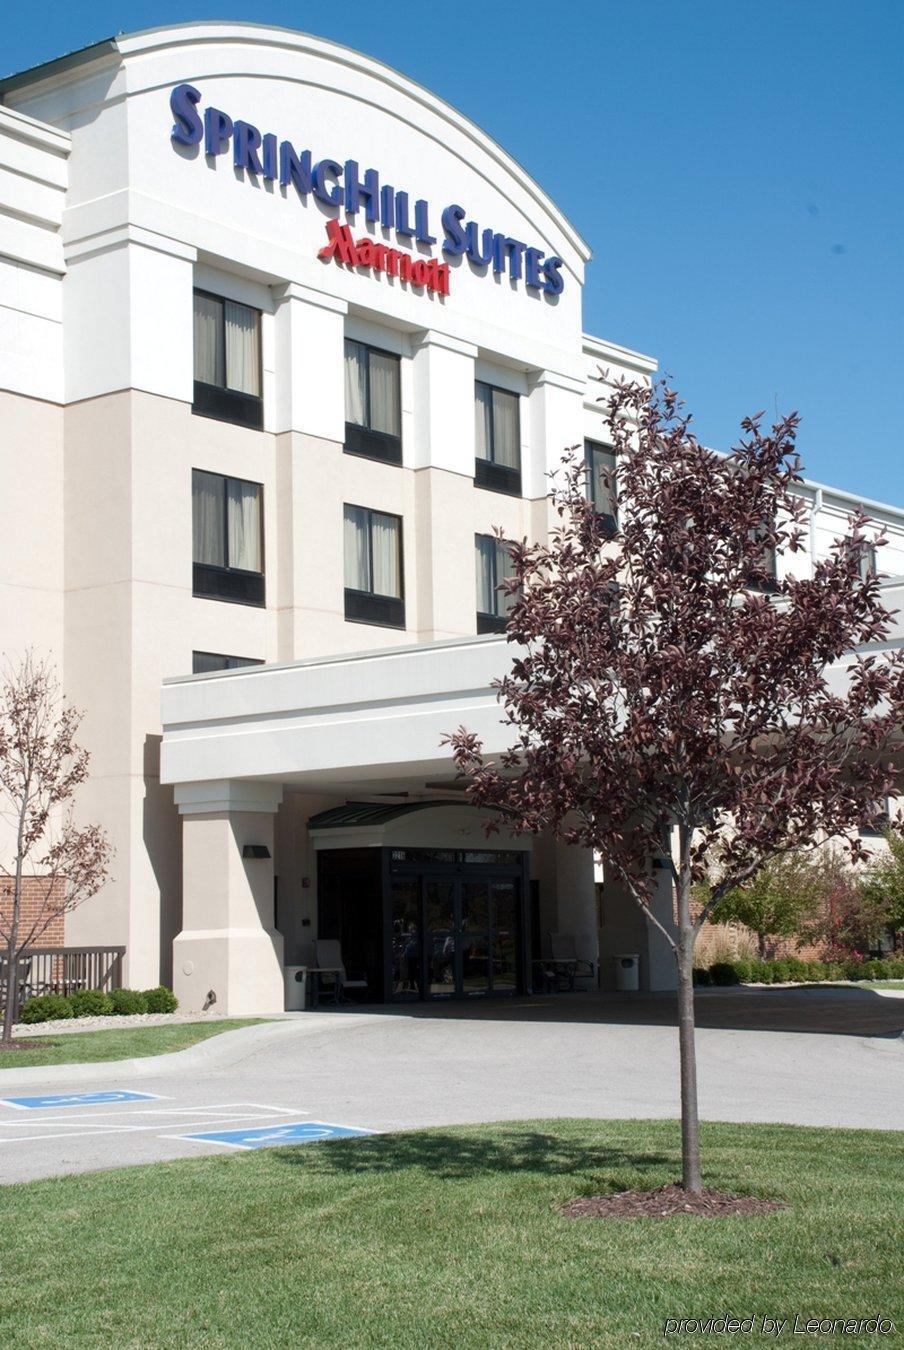 Springhill Suites By Marriott Omaha East, Council Bluffs, Ia Exterior photo